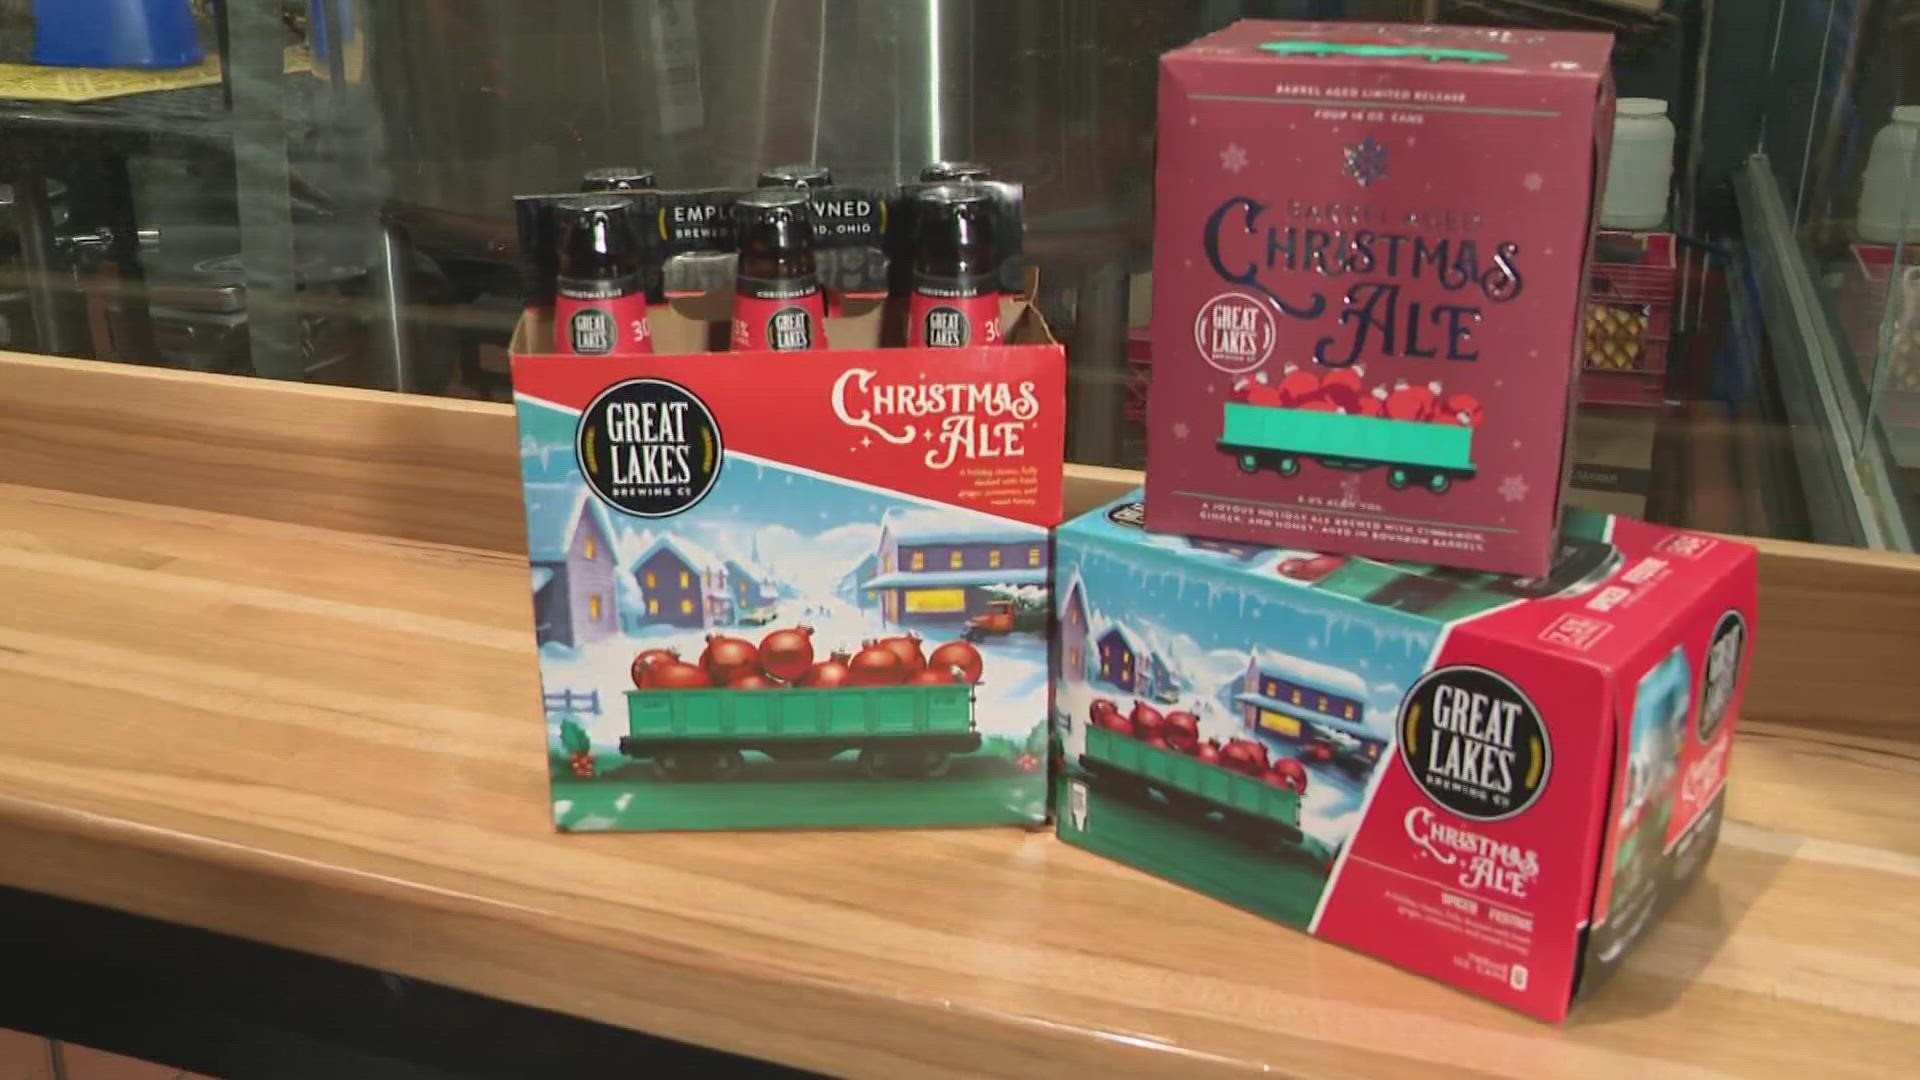 It's back! Christmas Ale is making its return ahead of Halloween courtesy of the Great Lakes Brewing Company.